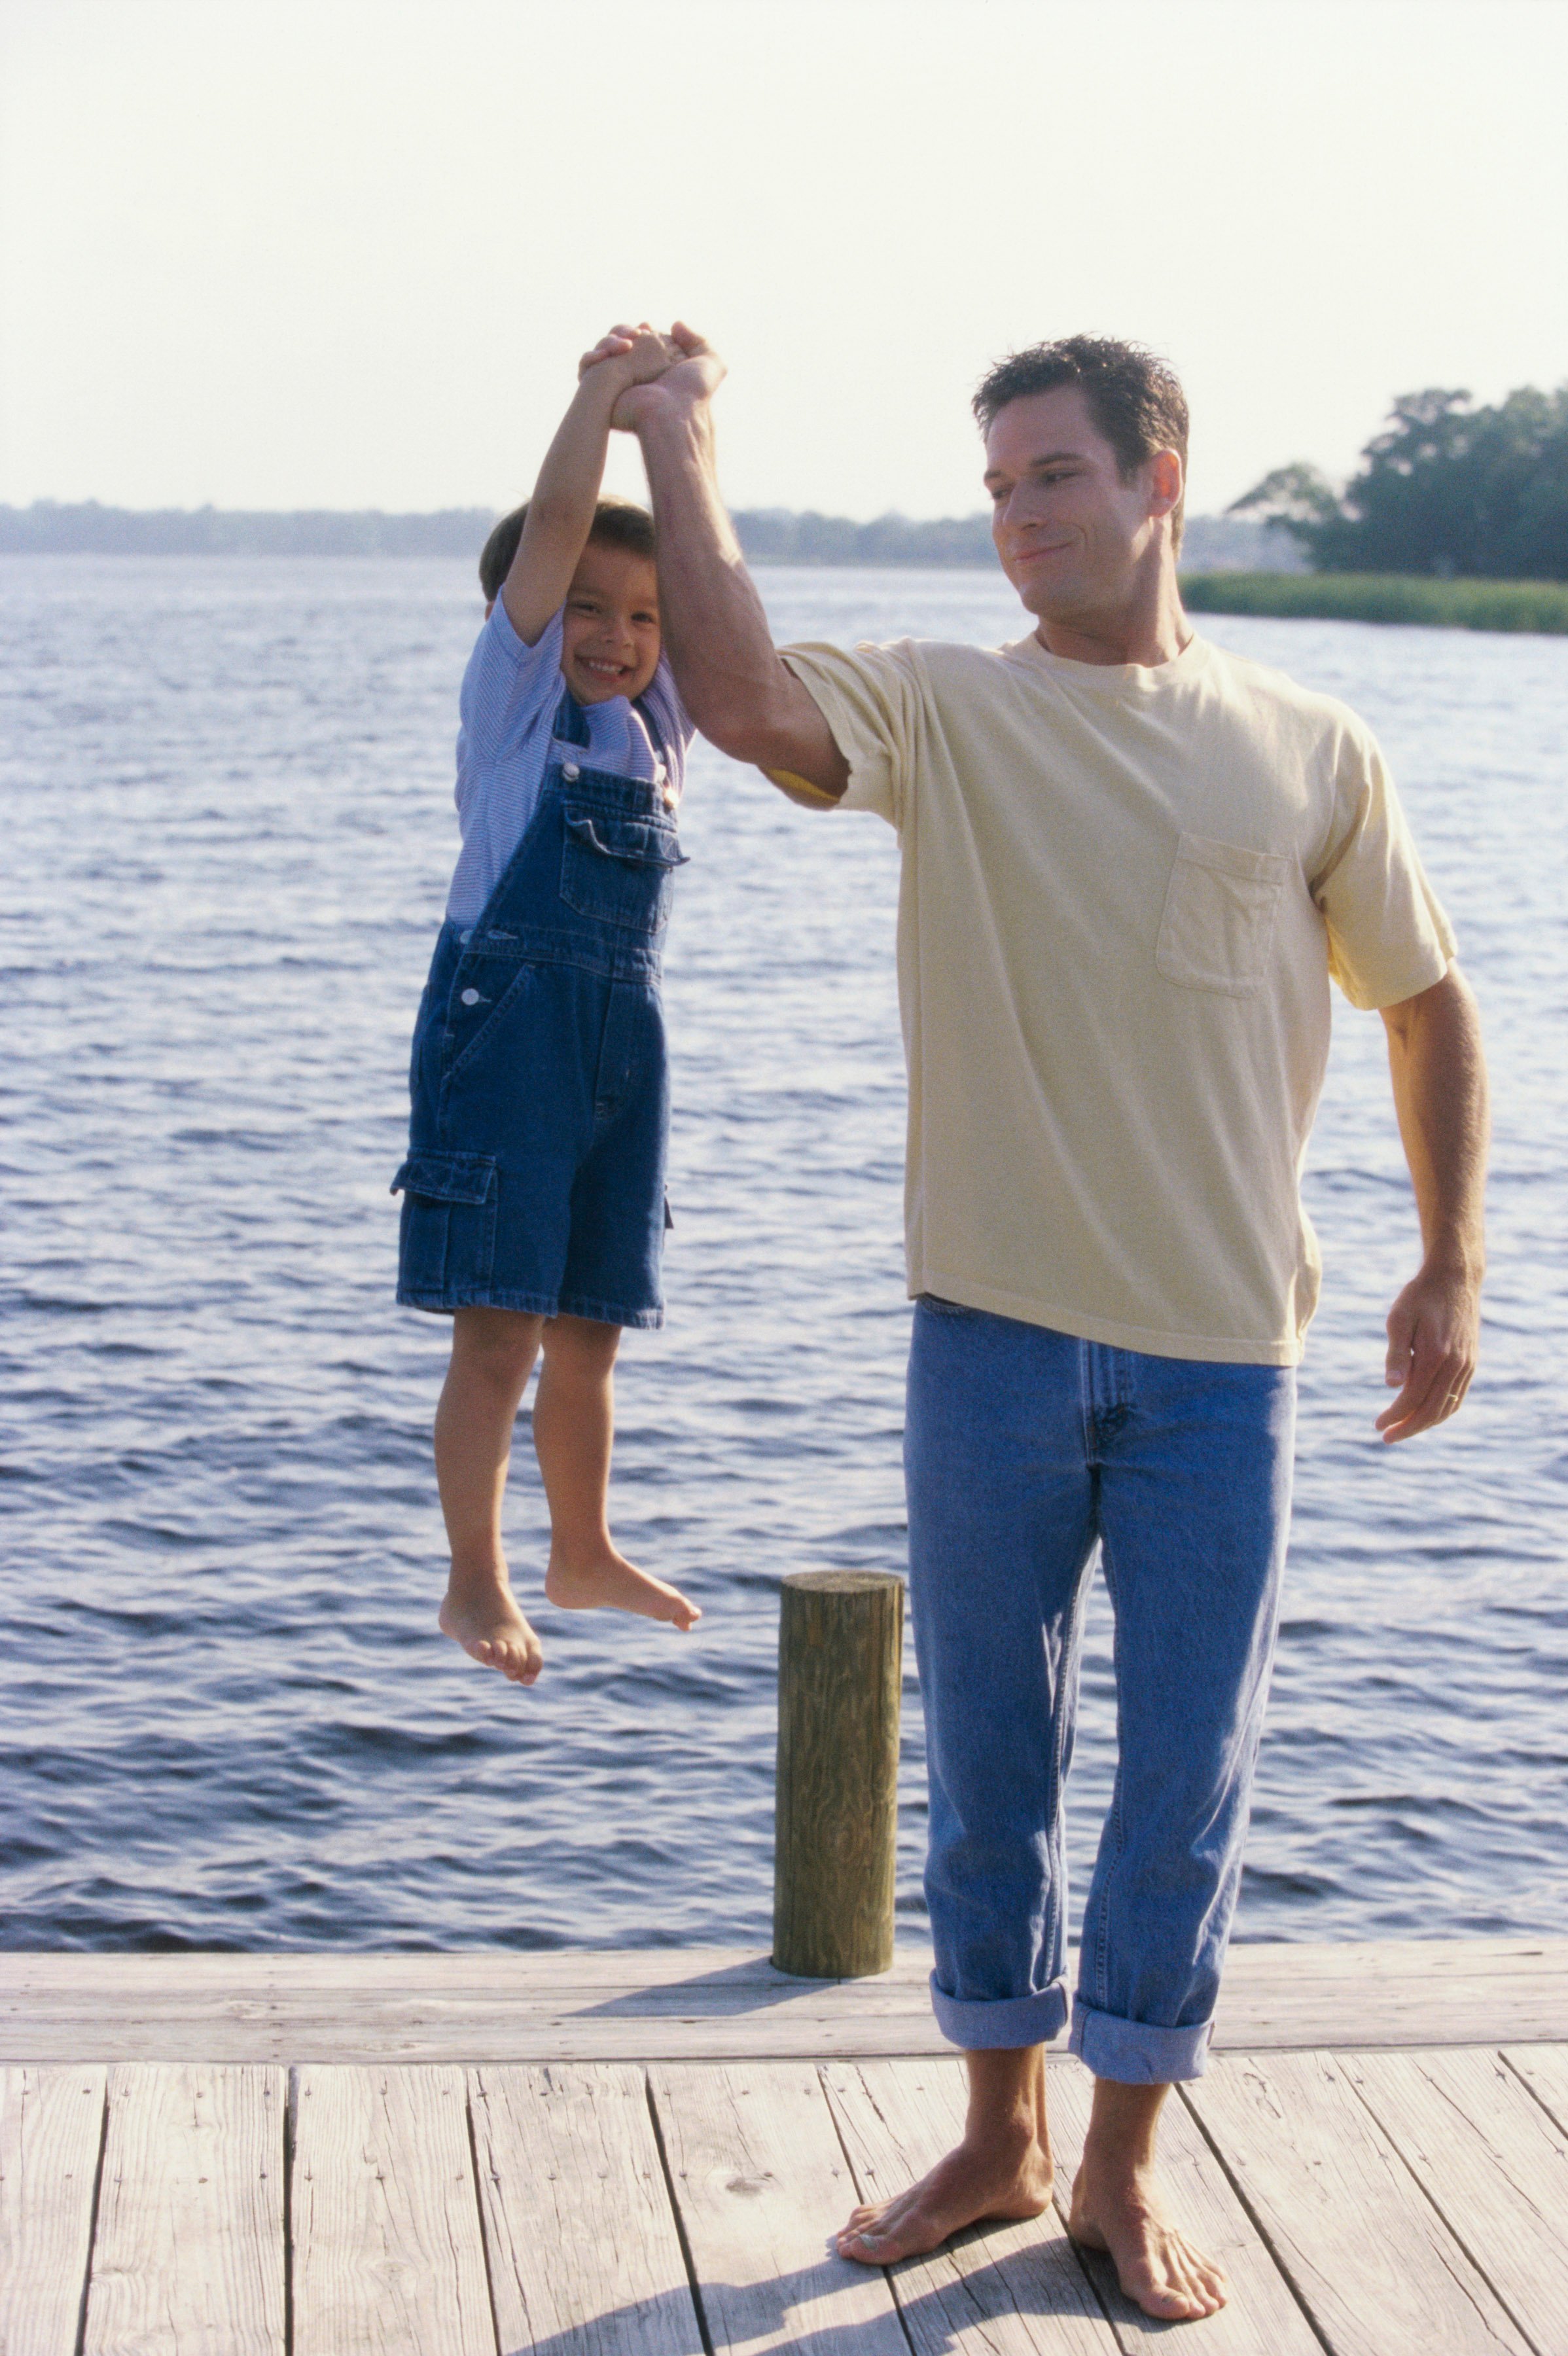 Dad lifting son with one arm on a dock